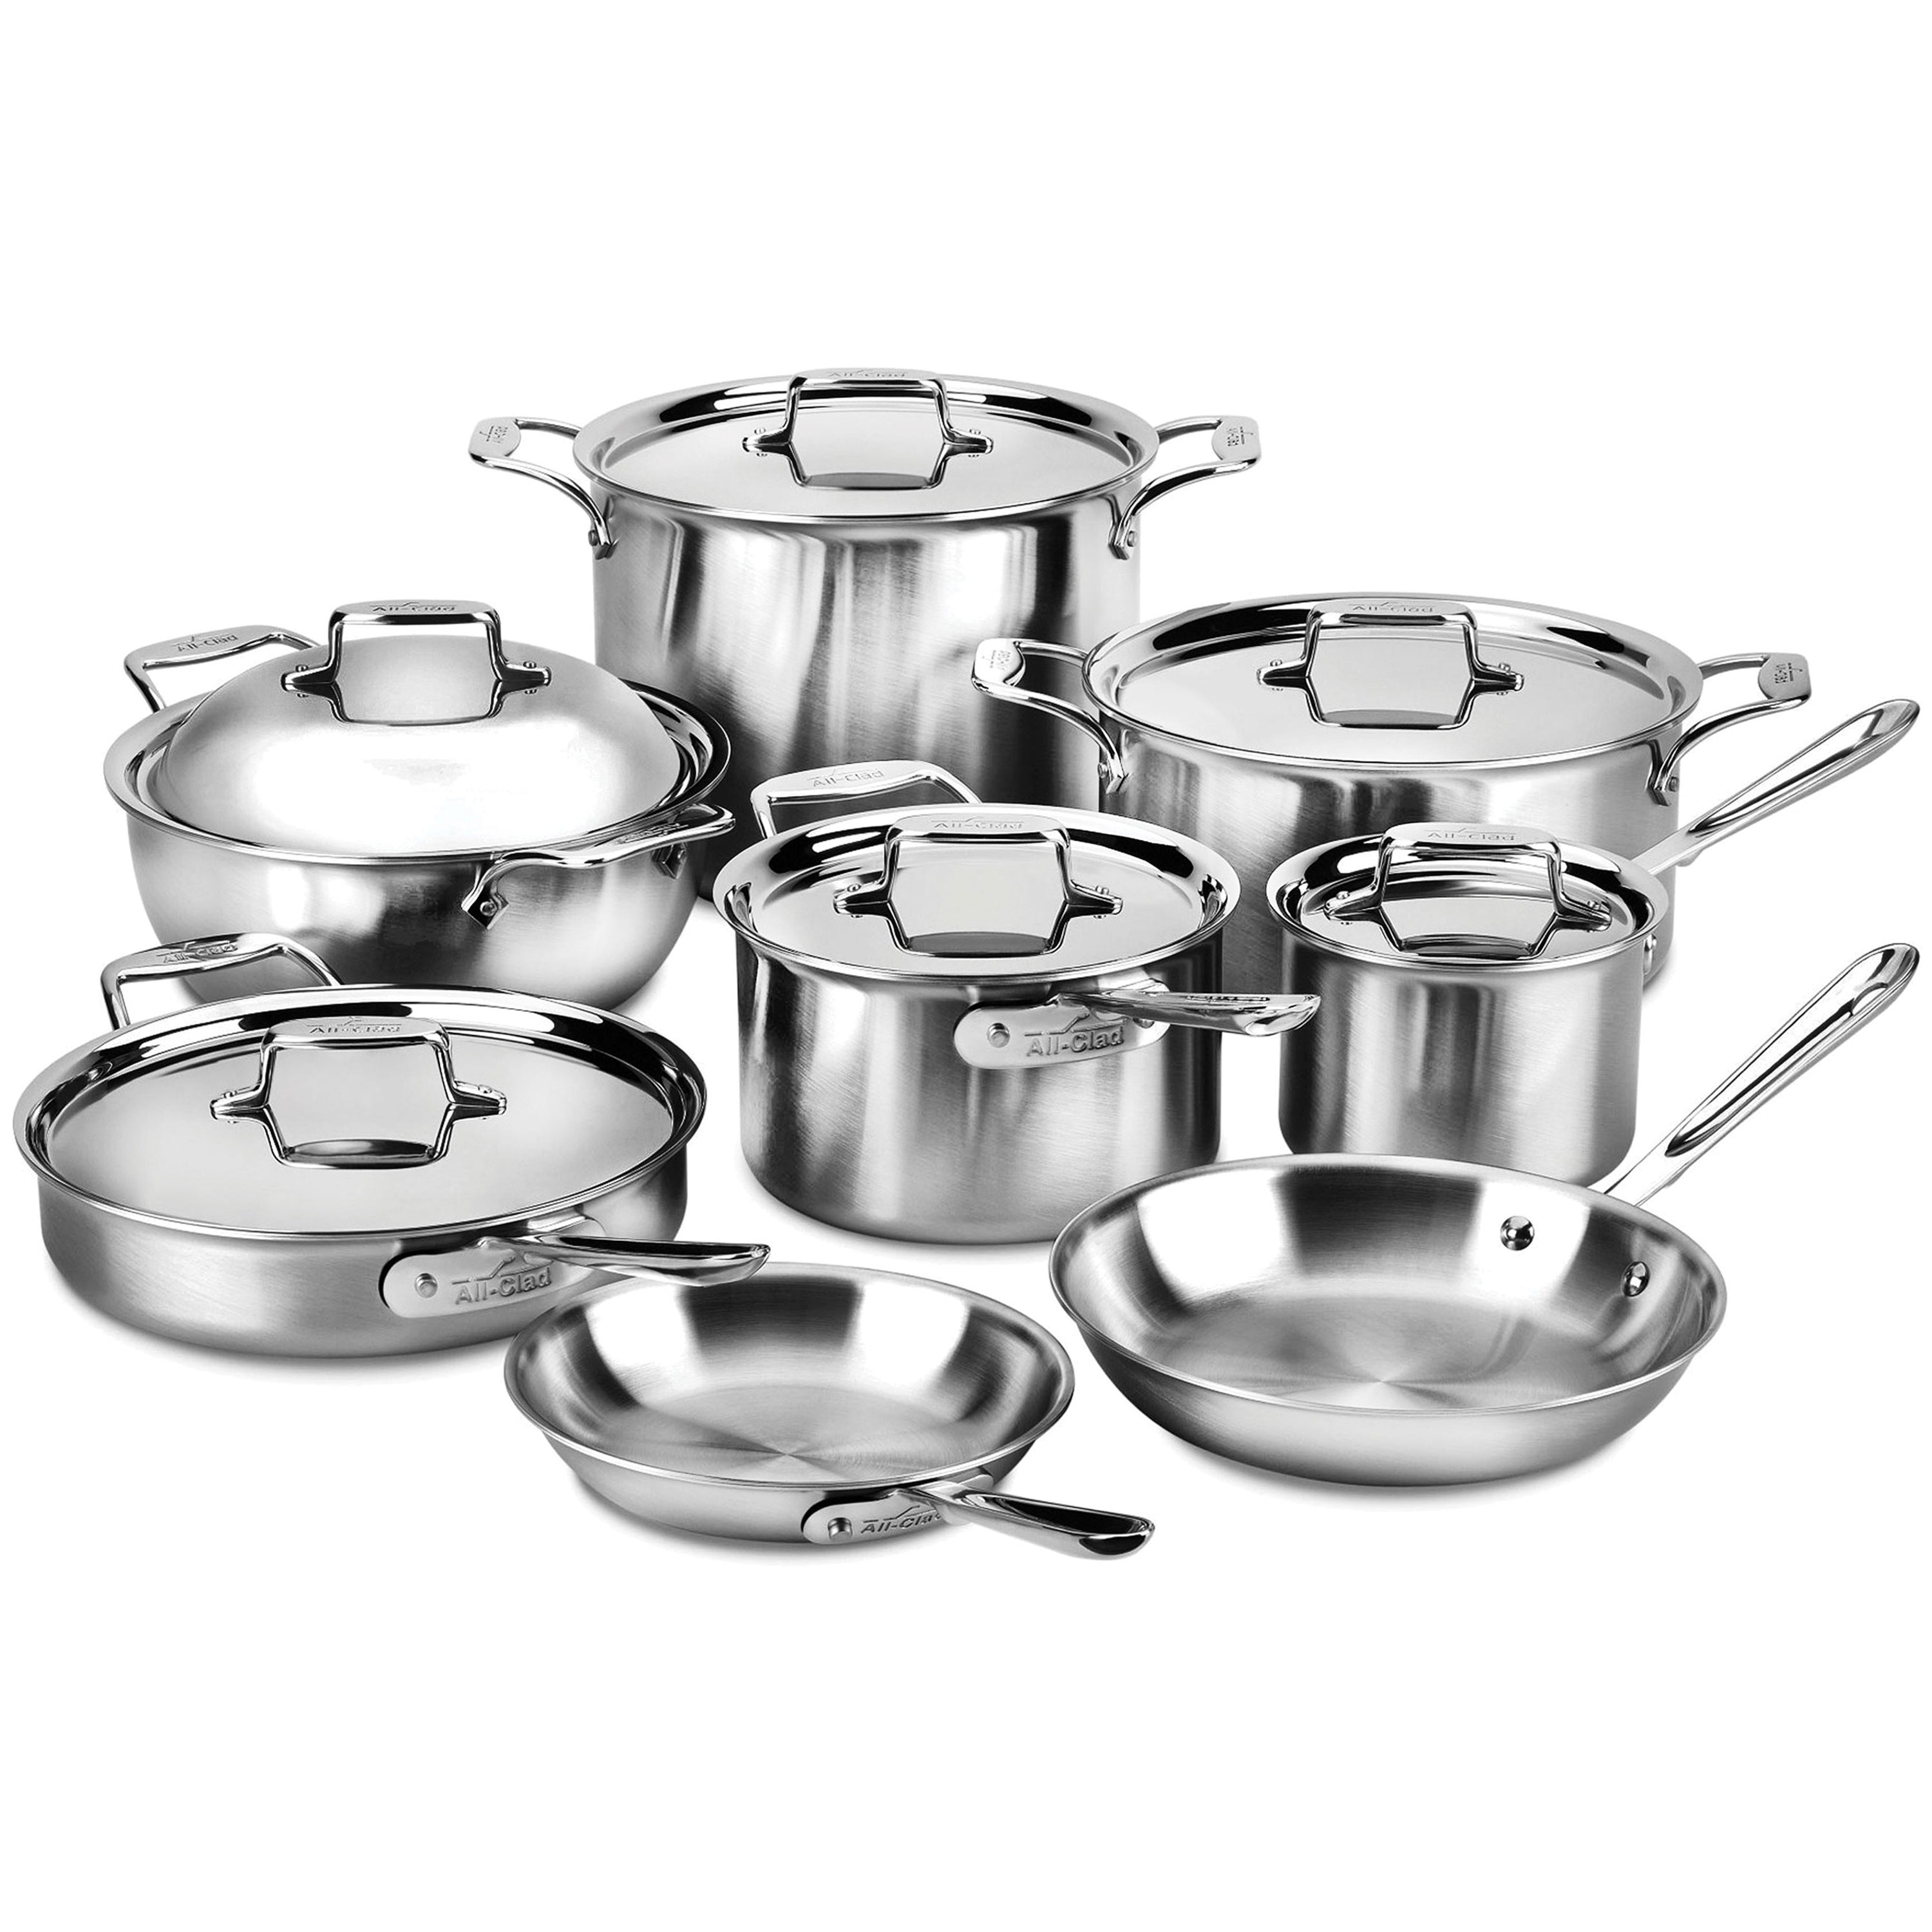 All-Clad 14-pc D5 Stainless Cookware Set 